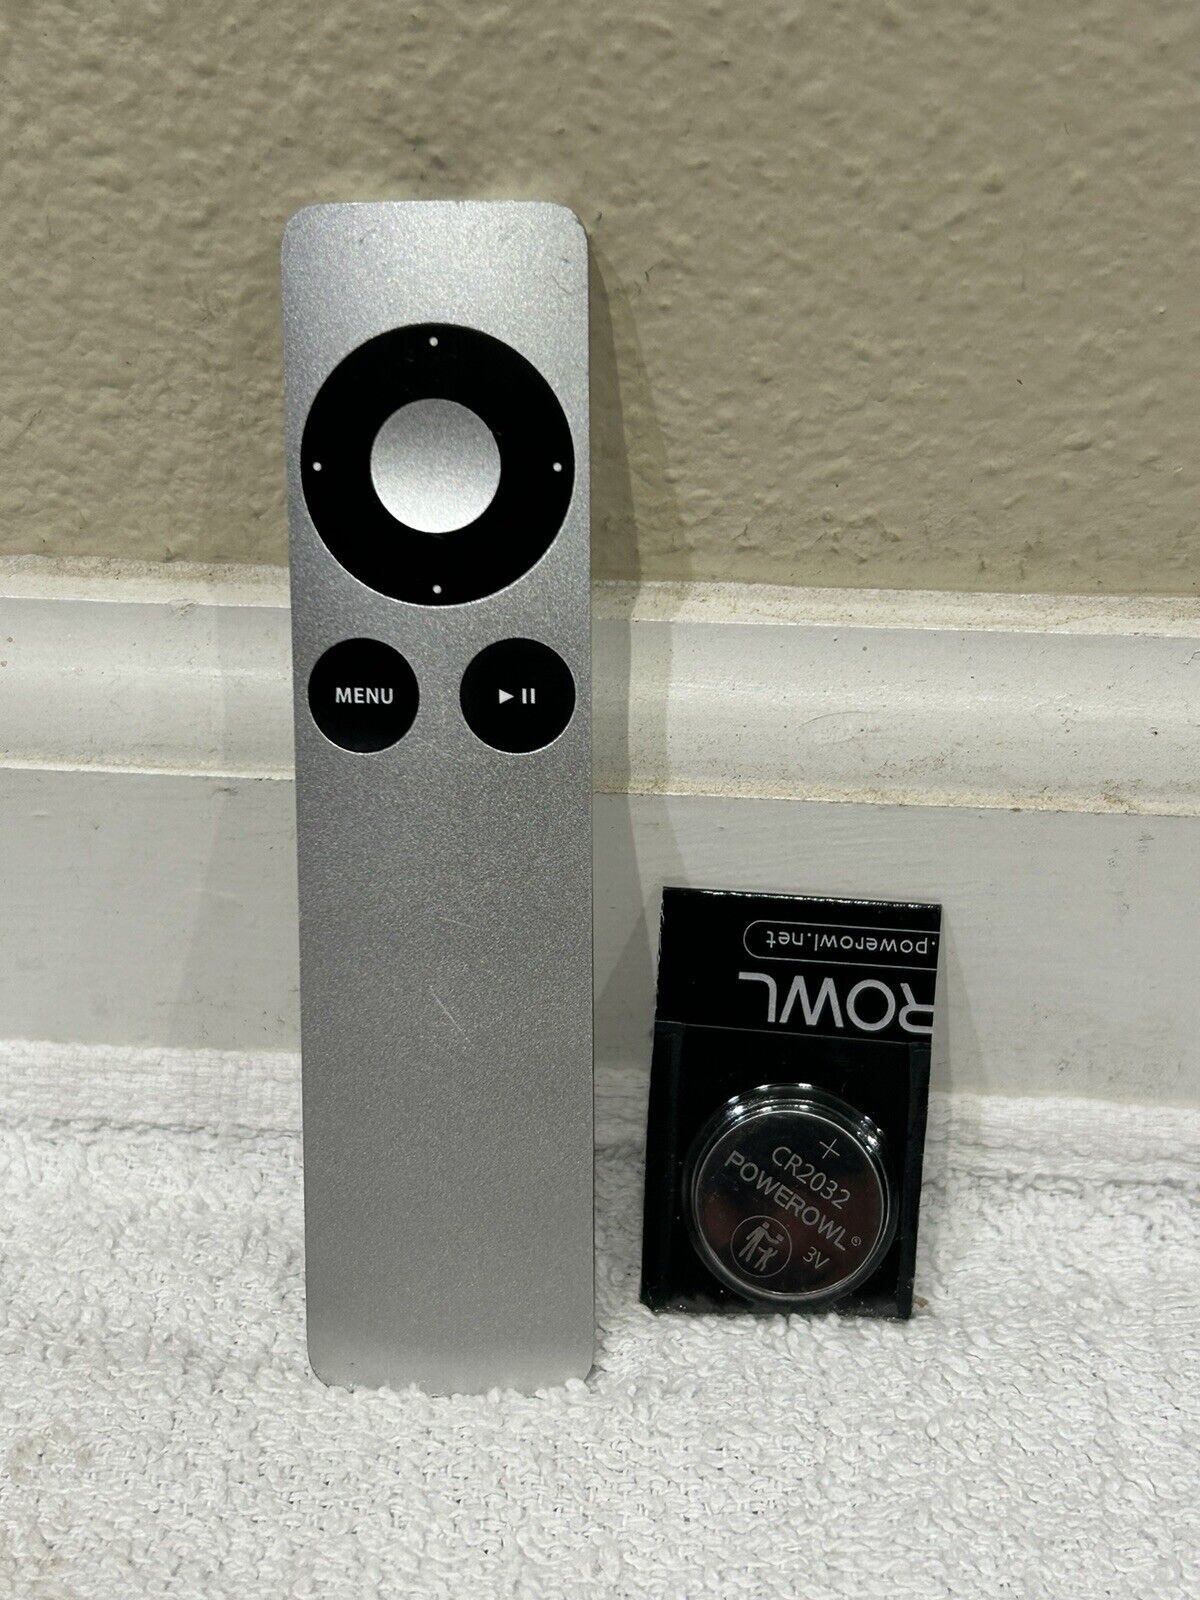 SILVER ALUMINUM IR INFRARED REMOTE - Apple TV, MacBook, A1294 + Sealed Battery